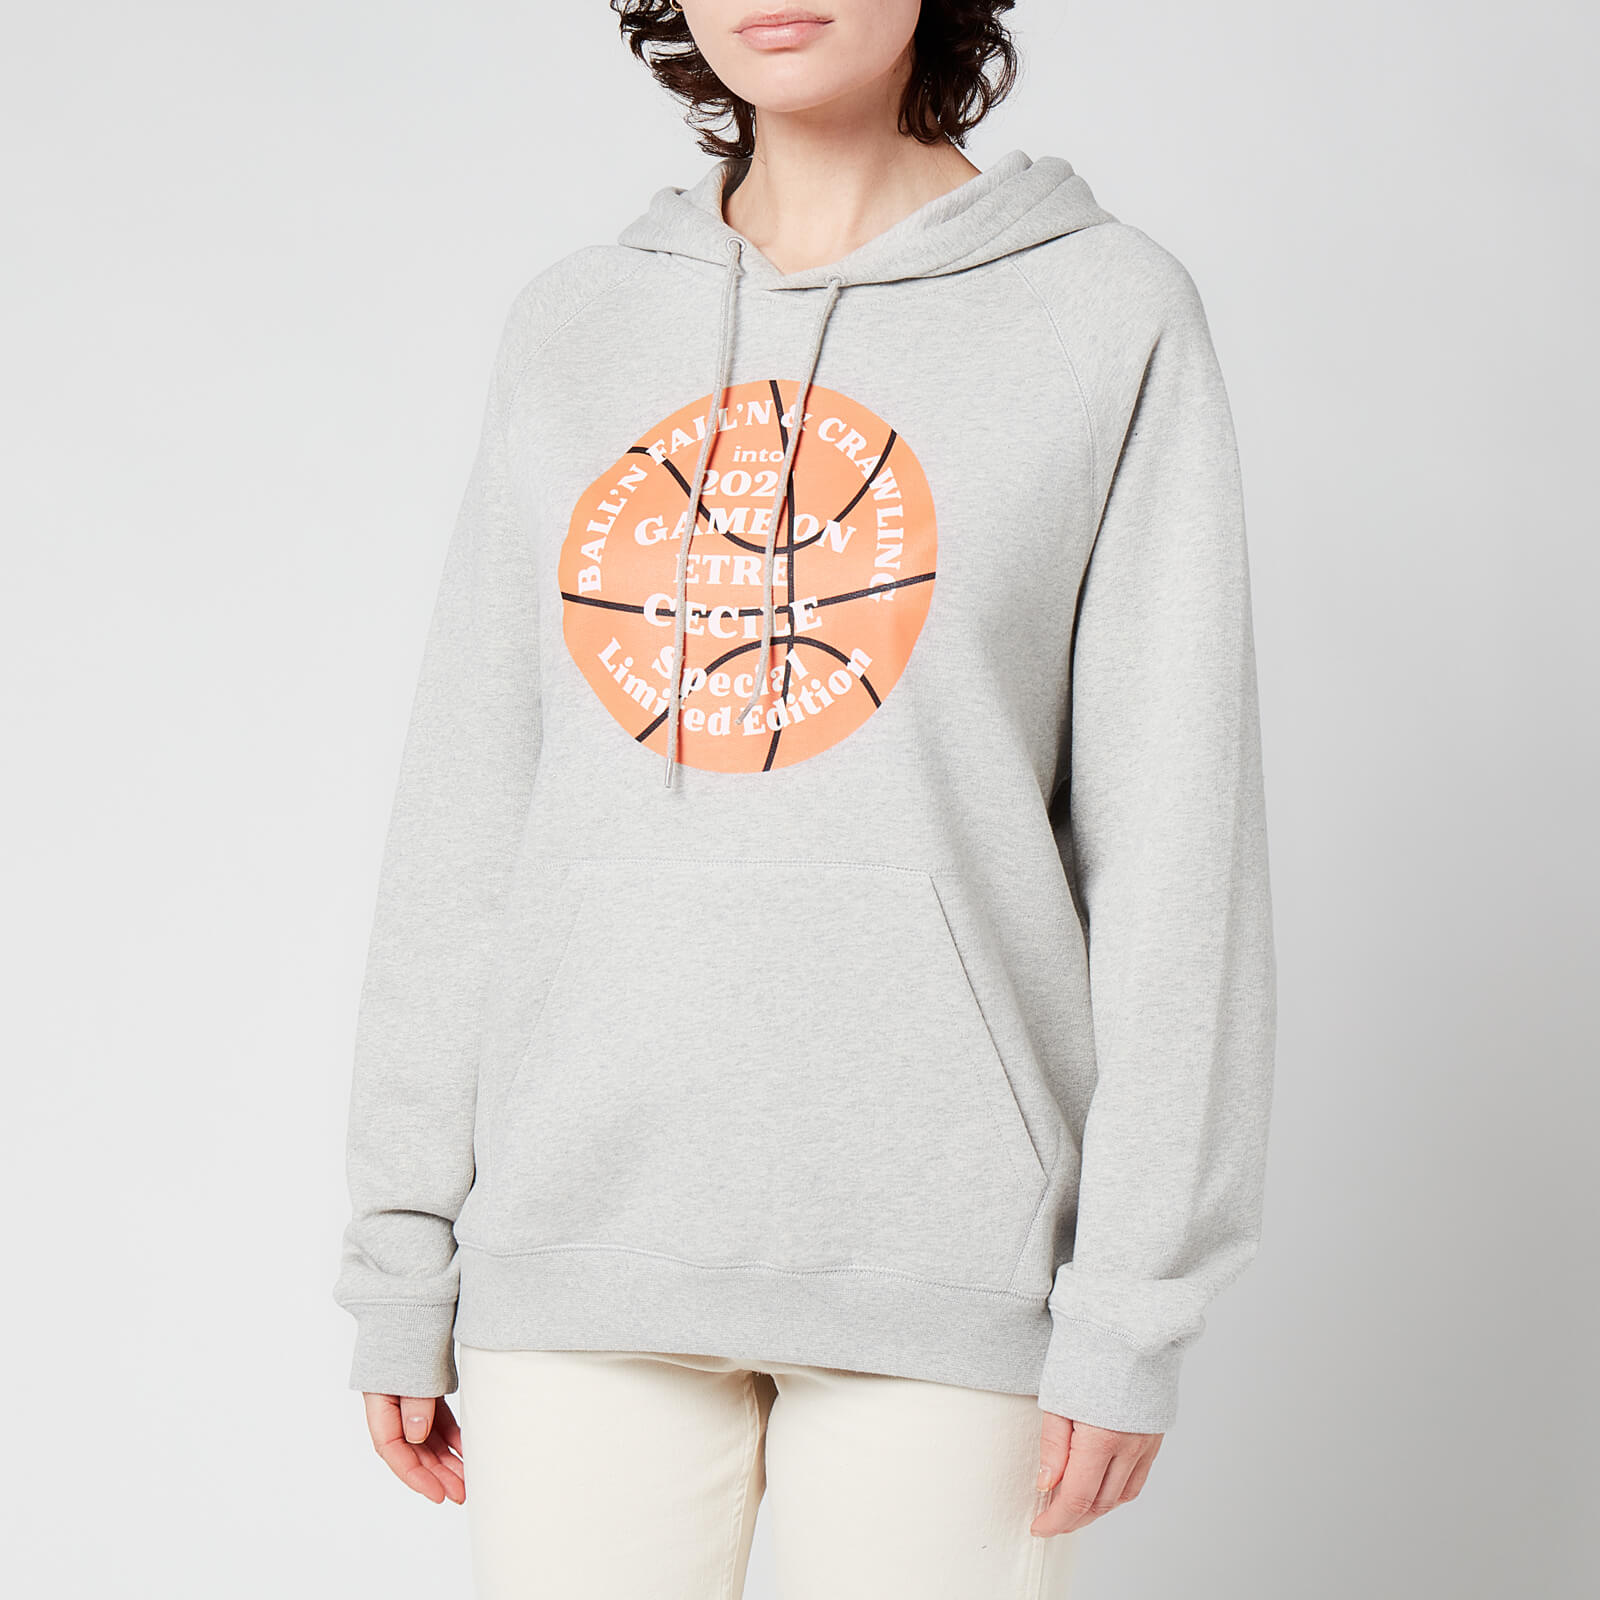 Etre Cecile Women's Cotton Unbrush Basketball Classic Hoodie - Grey Marl